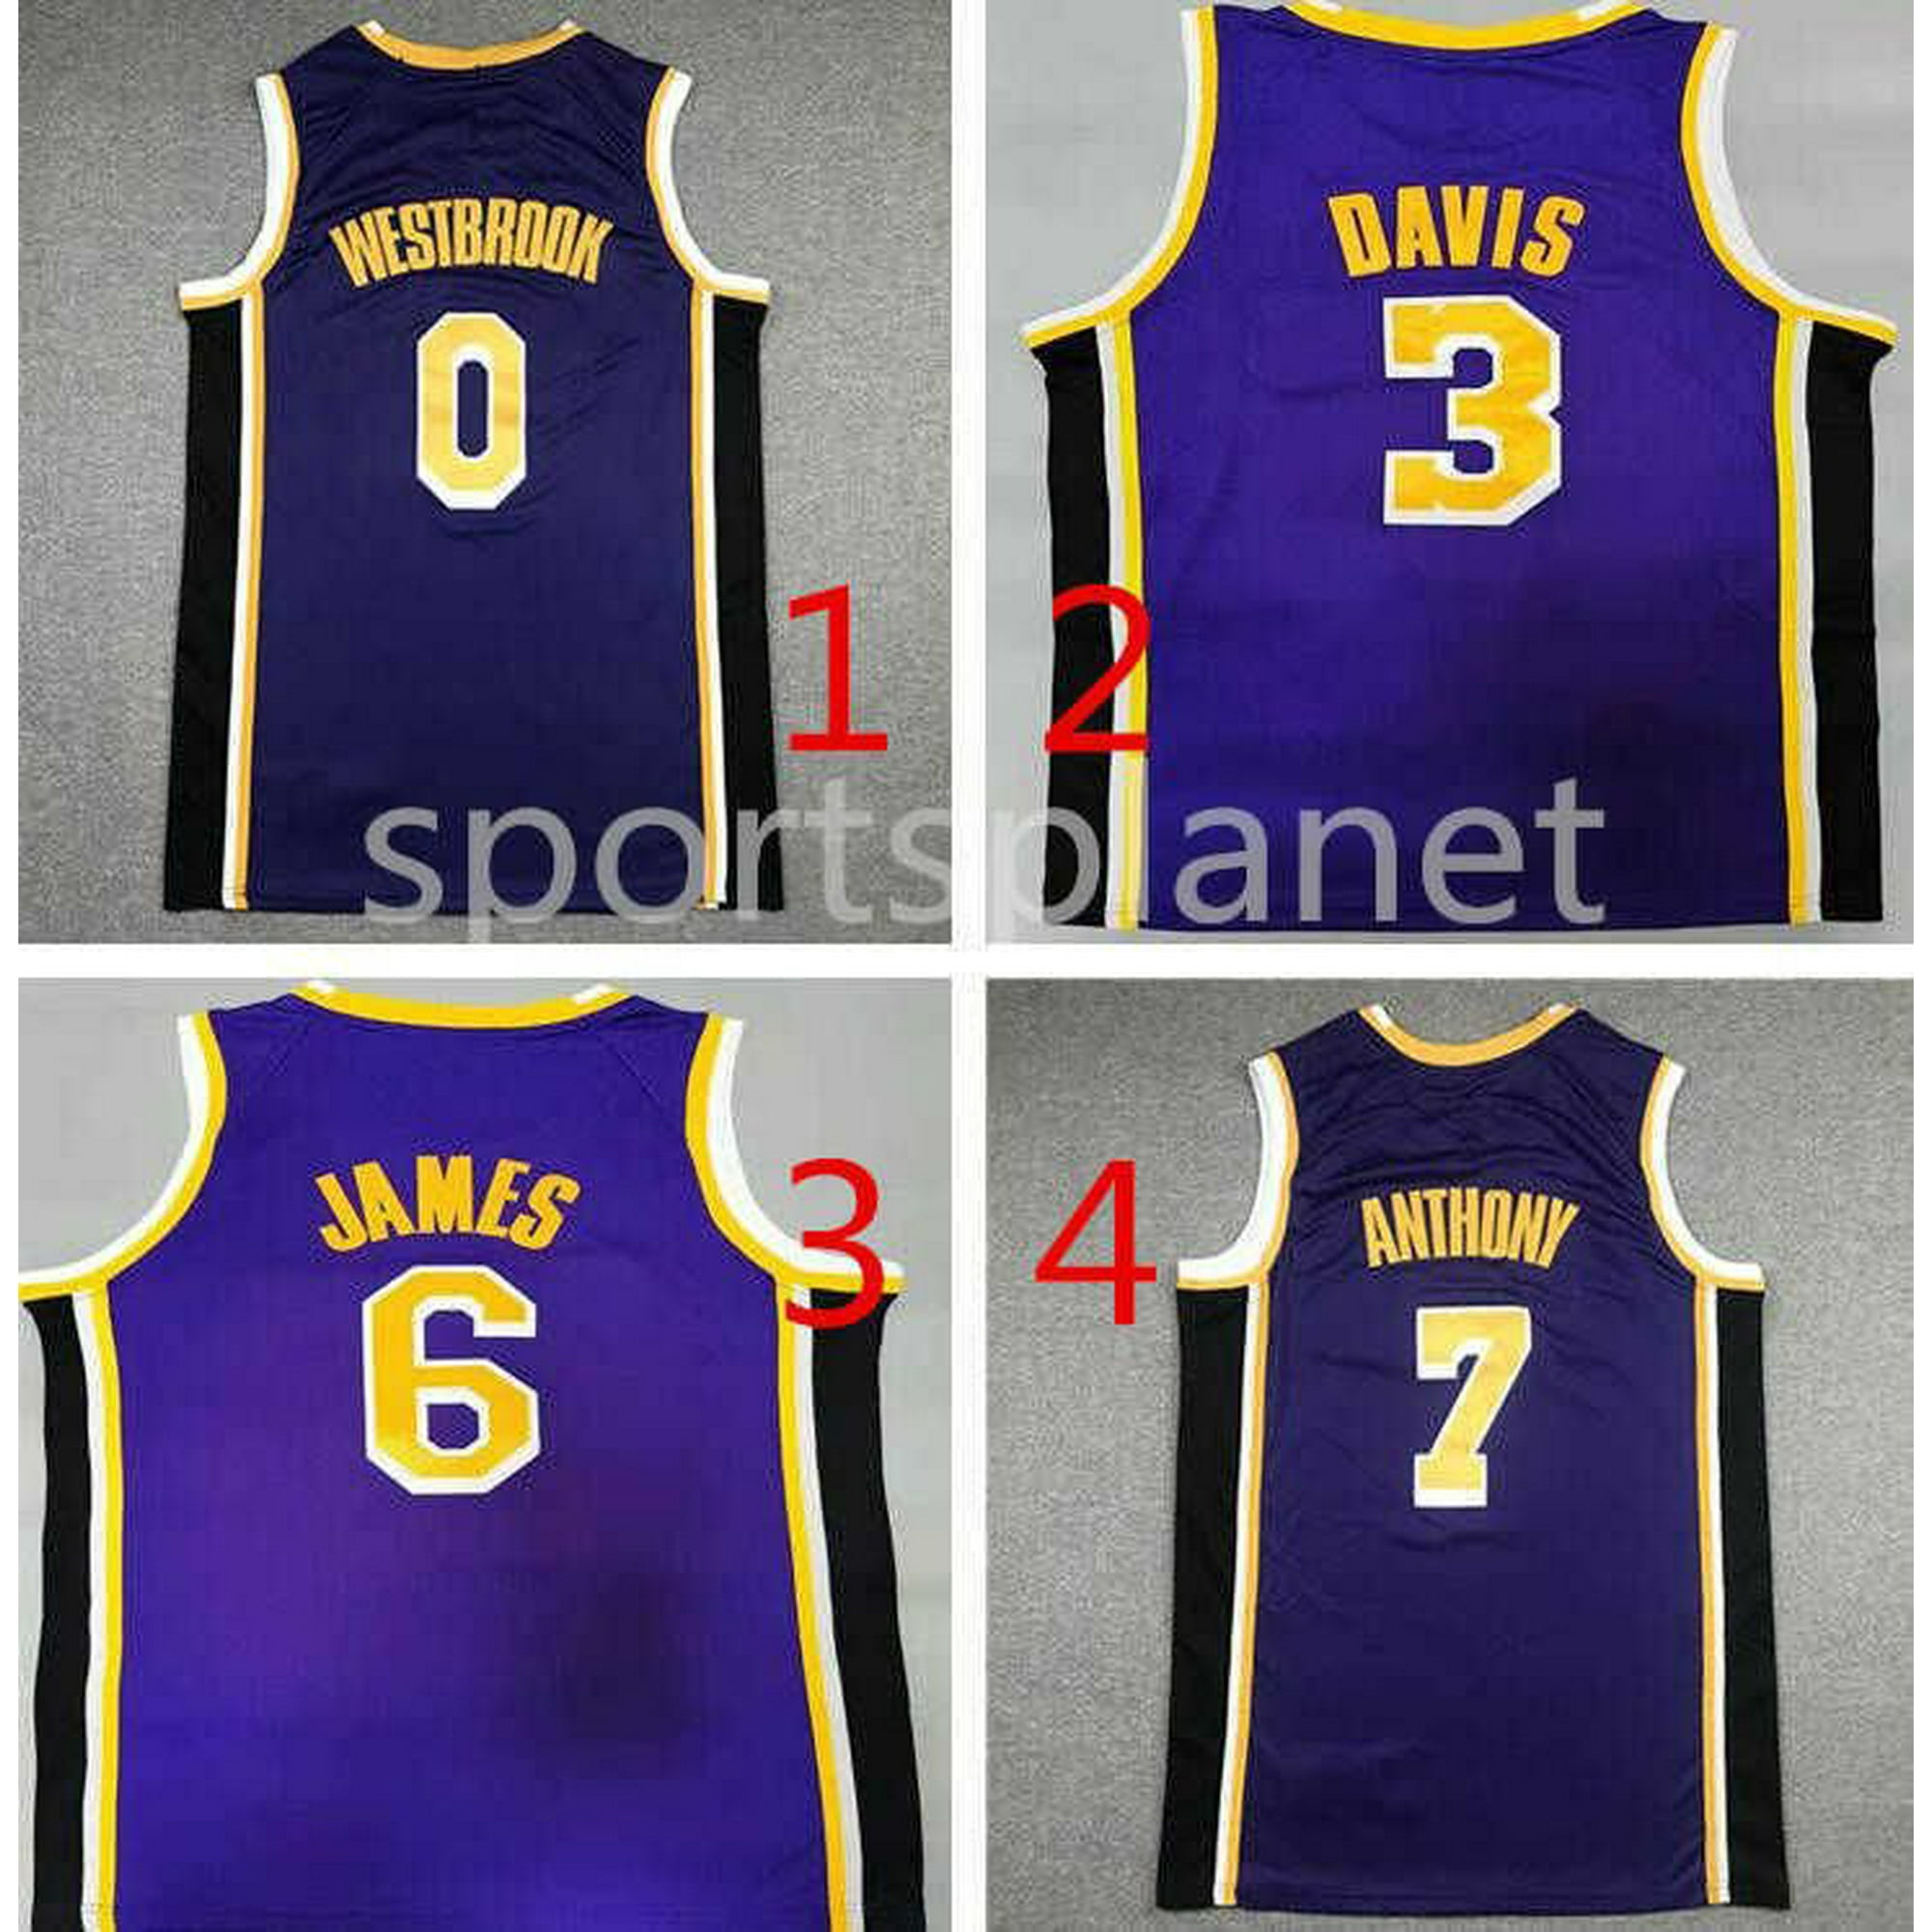 lebron black and yellow jersey